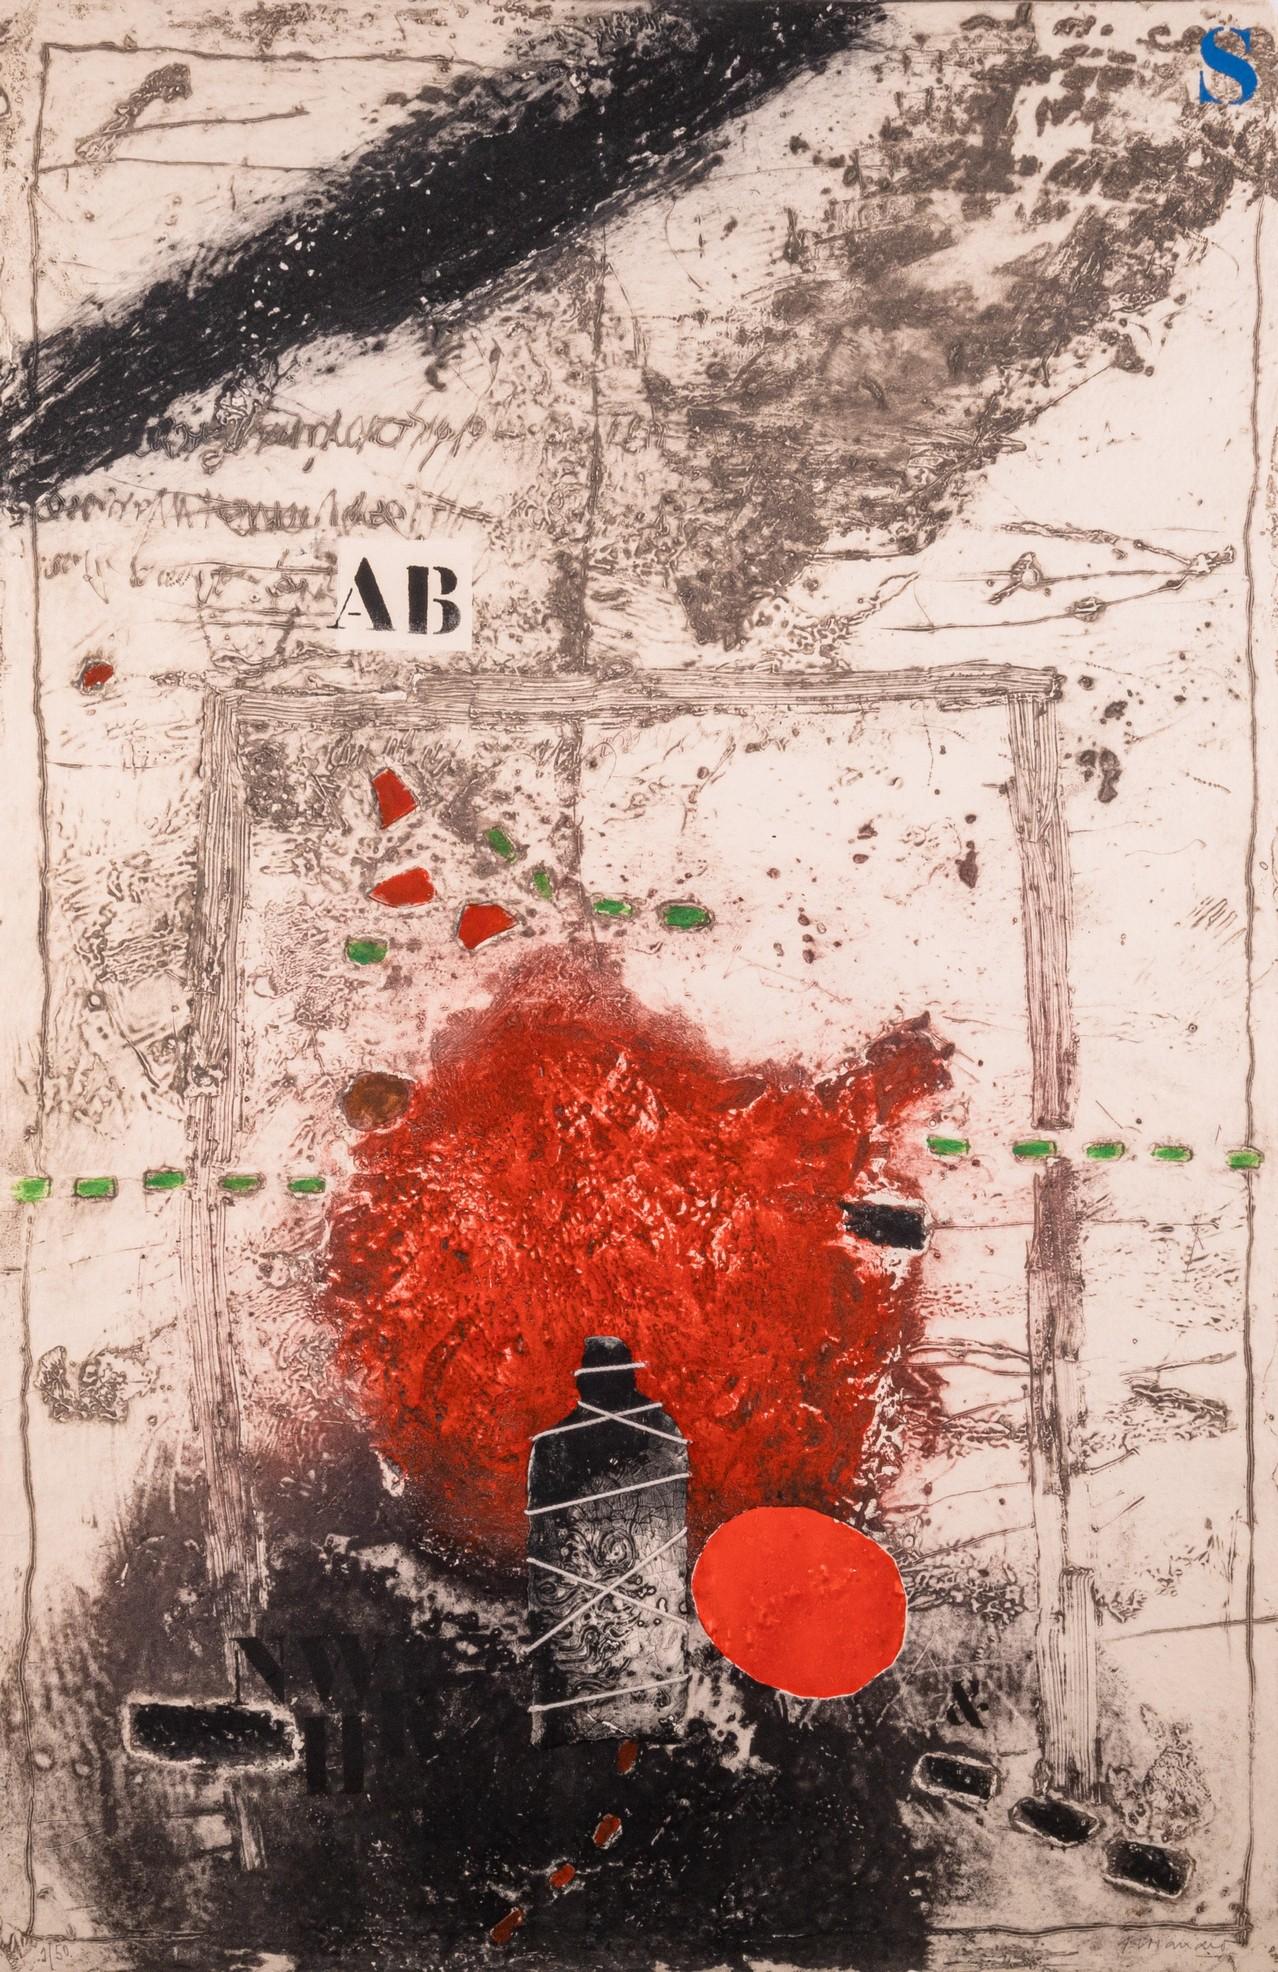 A captivating modern inspired carborundum etching on etching on Moulin de Larroque paper with applied collage and threaded twine by James Coignard. Hand signed bottom right with an annotation of 1/50 on the bottom left. From the “Otage et Rouge”